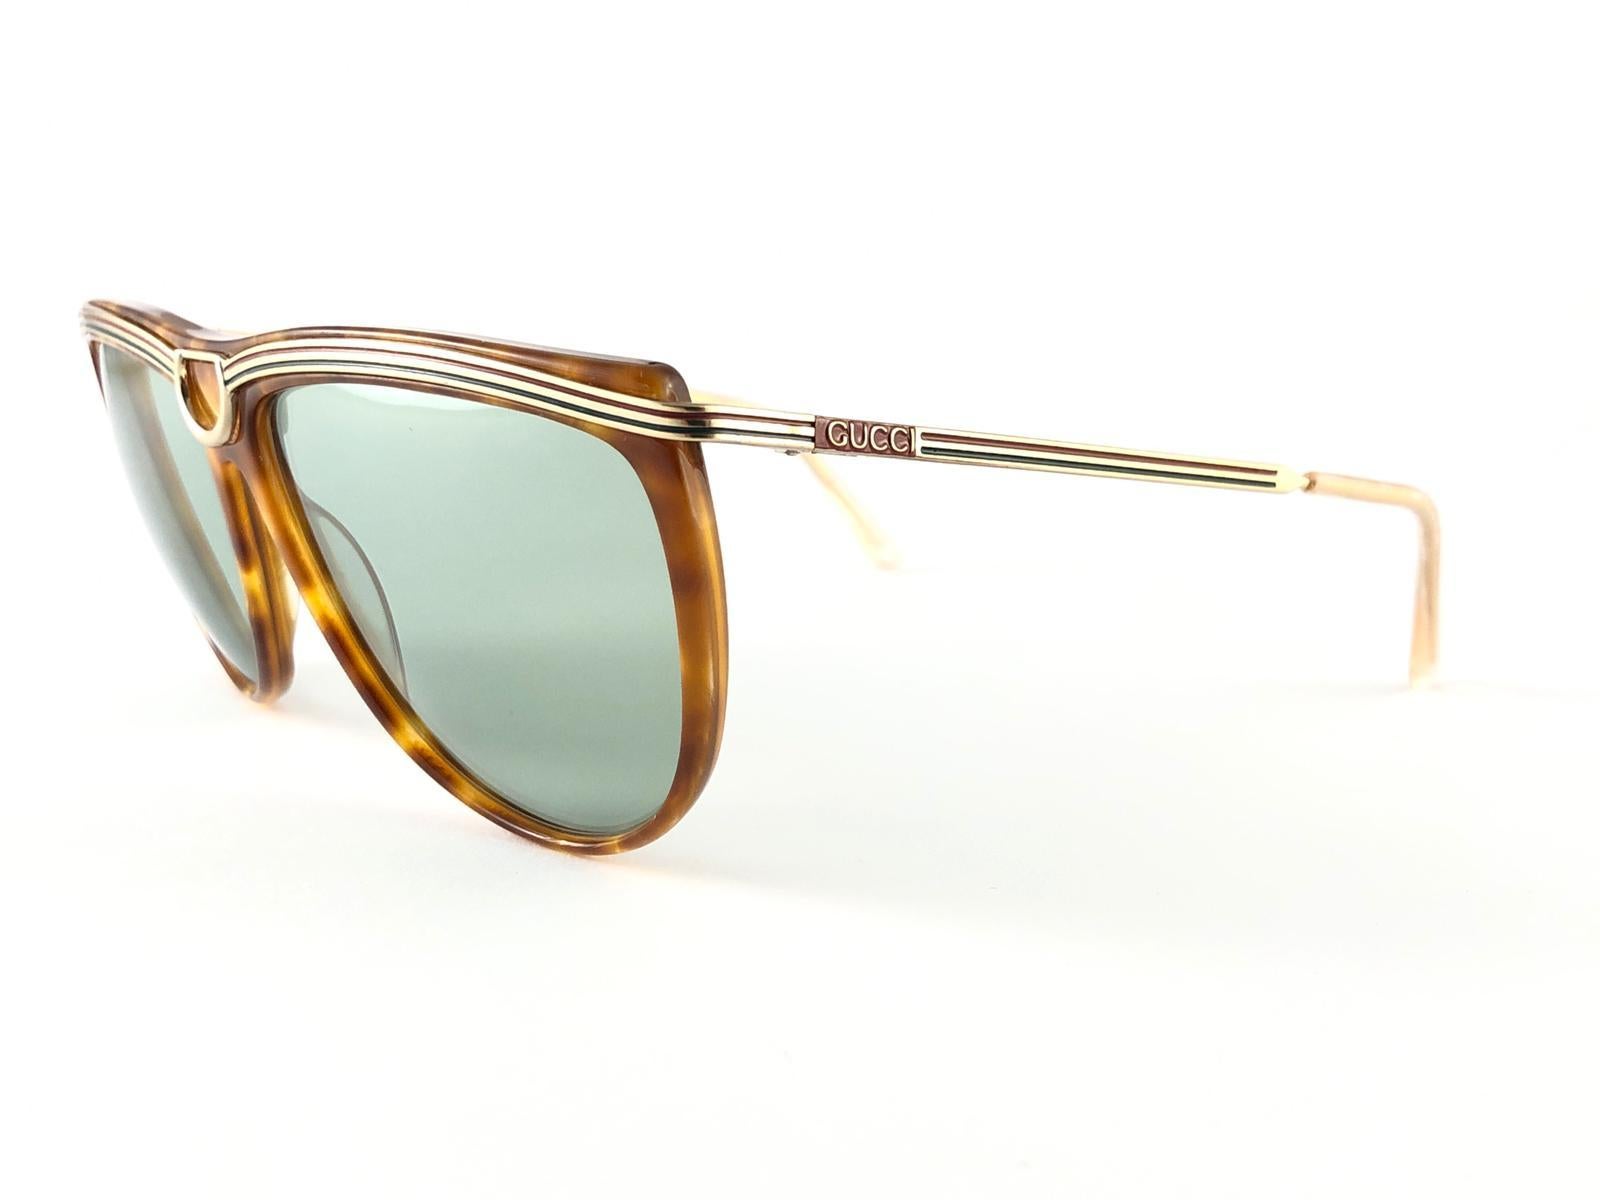 New Vintage Gucci 2303 S Tortoise & Gold Accents Sunglasses 1980's Made in Italy 1